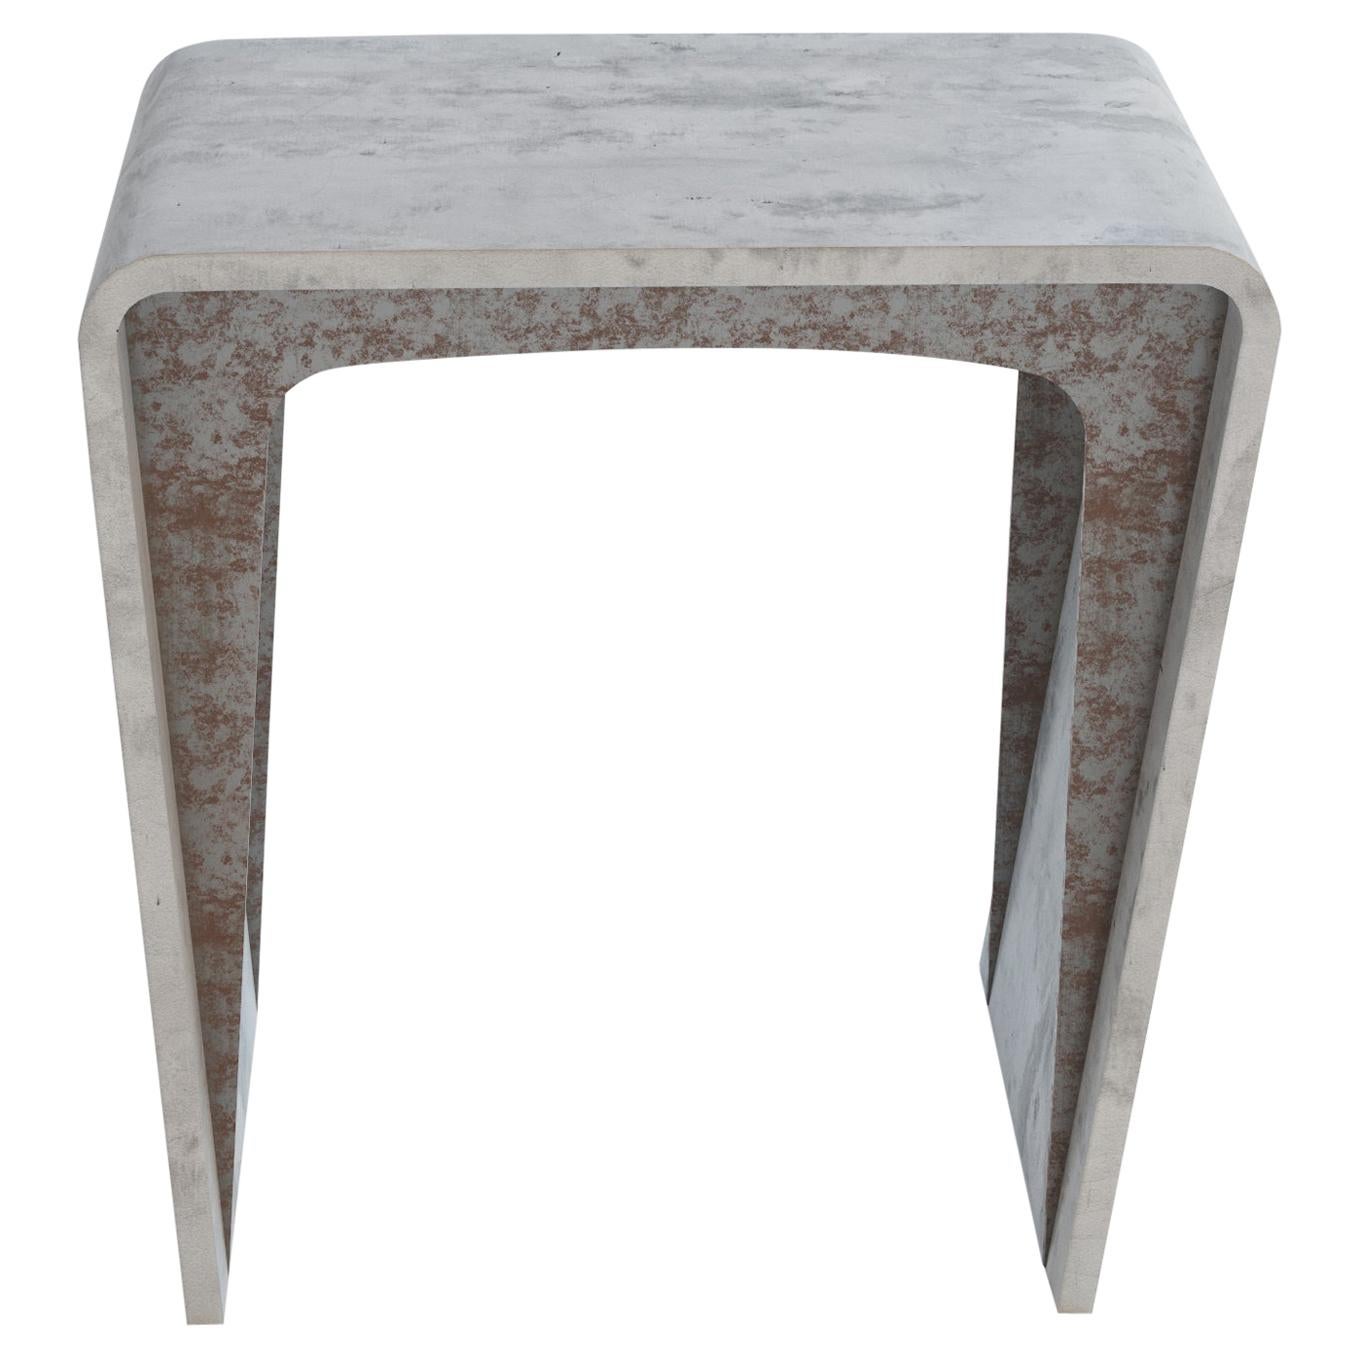 Todos Side Table, Concrete Canvas and Metal, by Neal Aronowitz